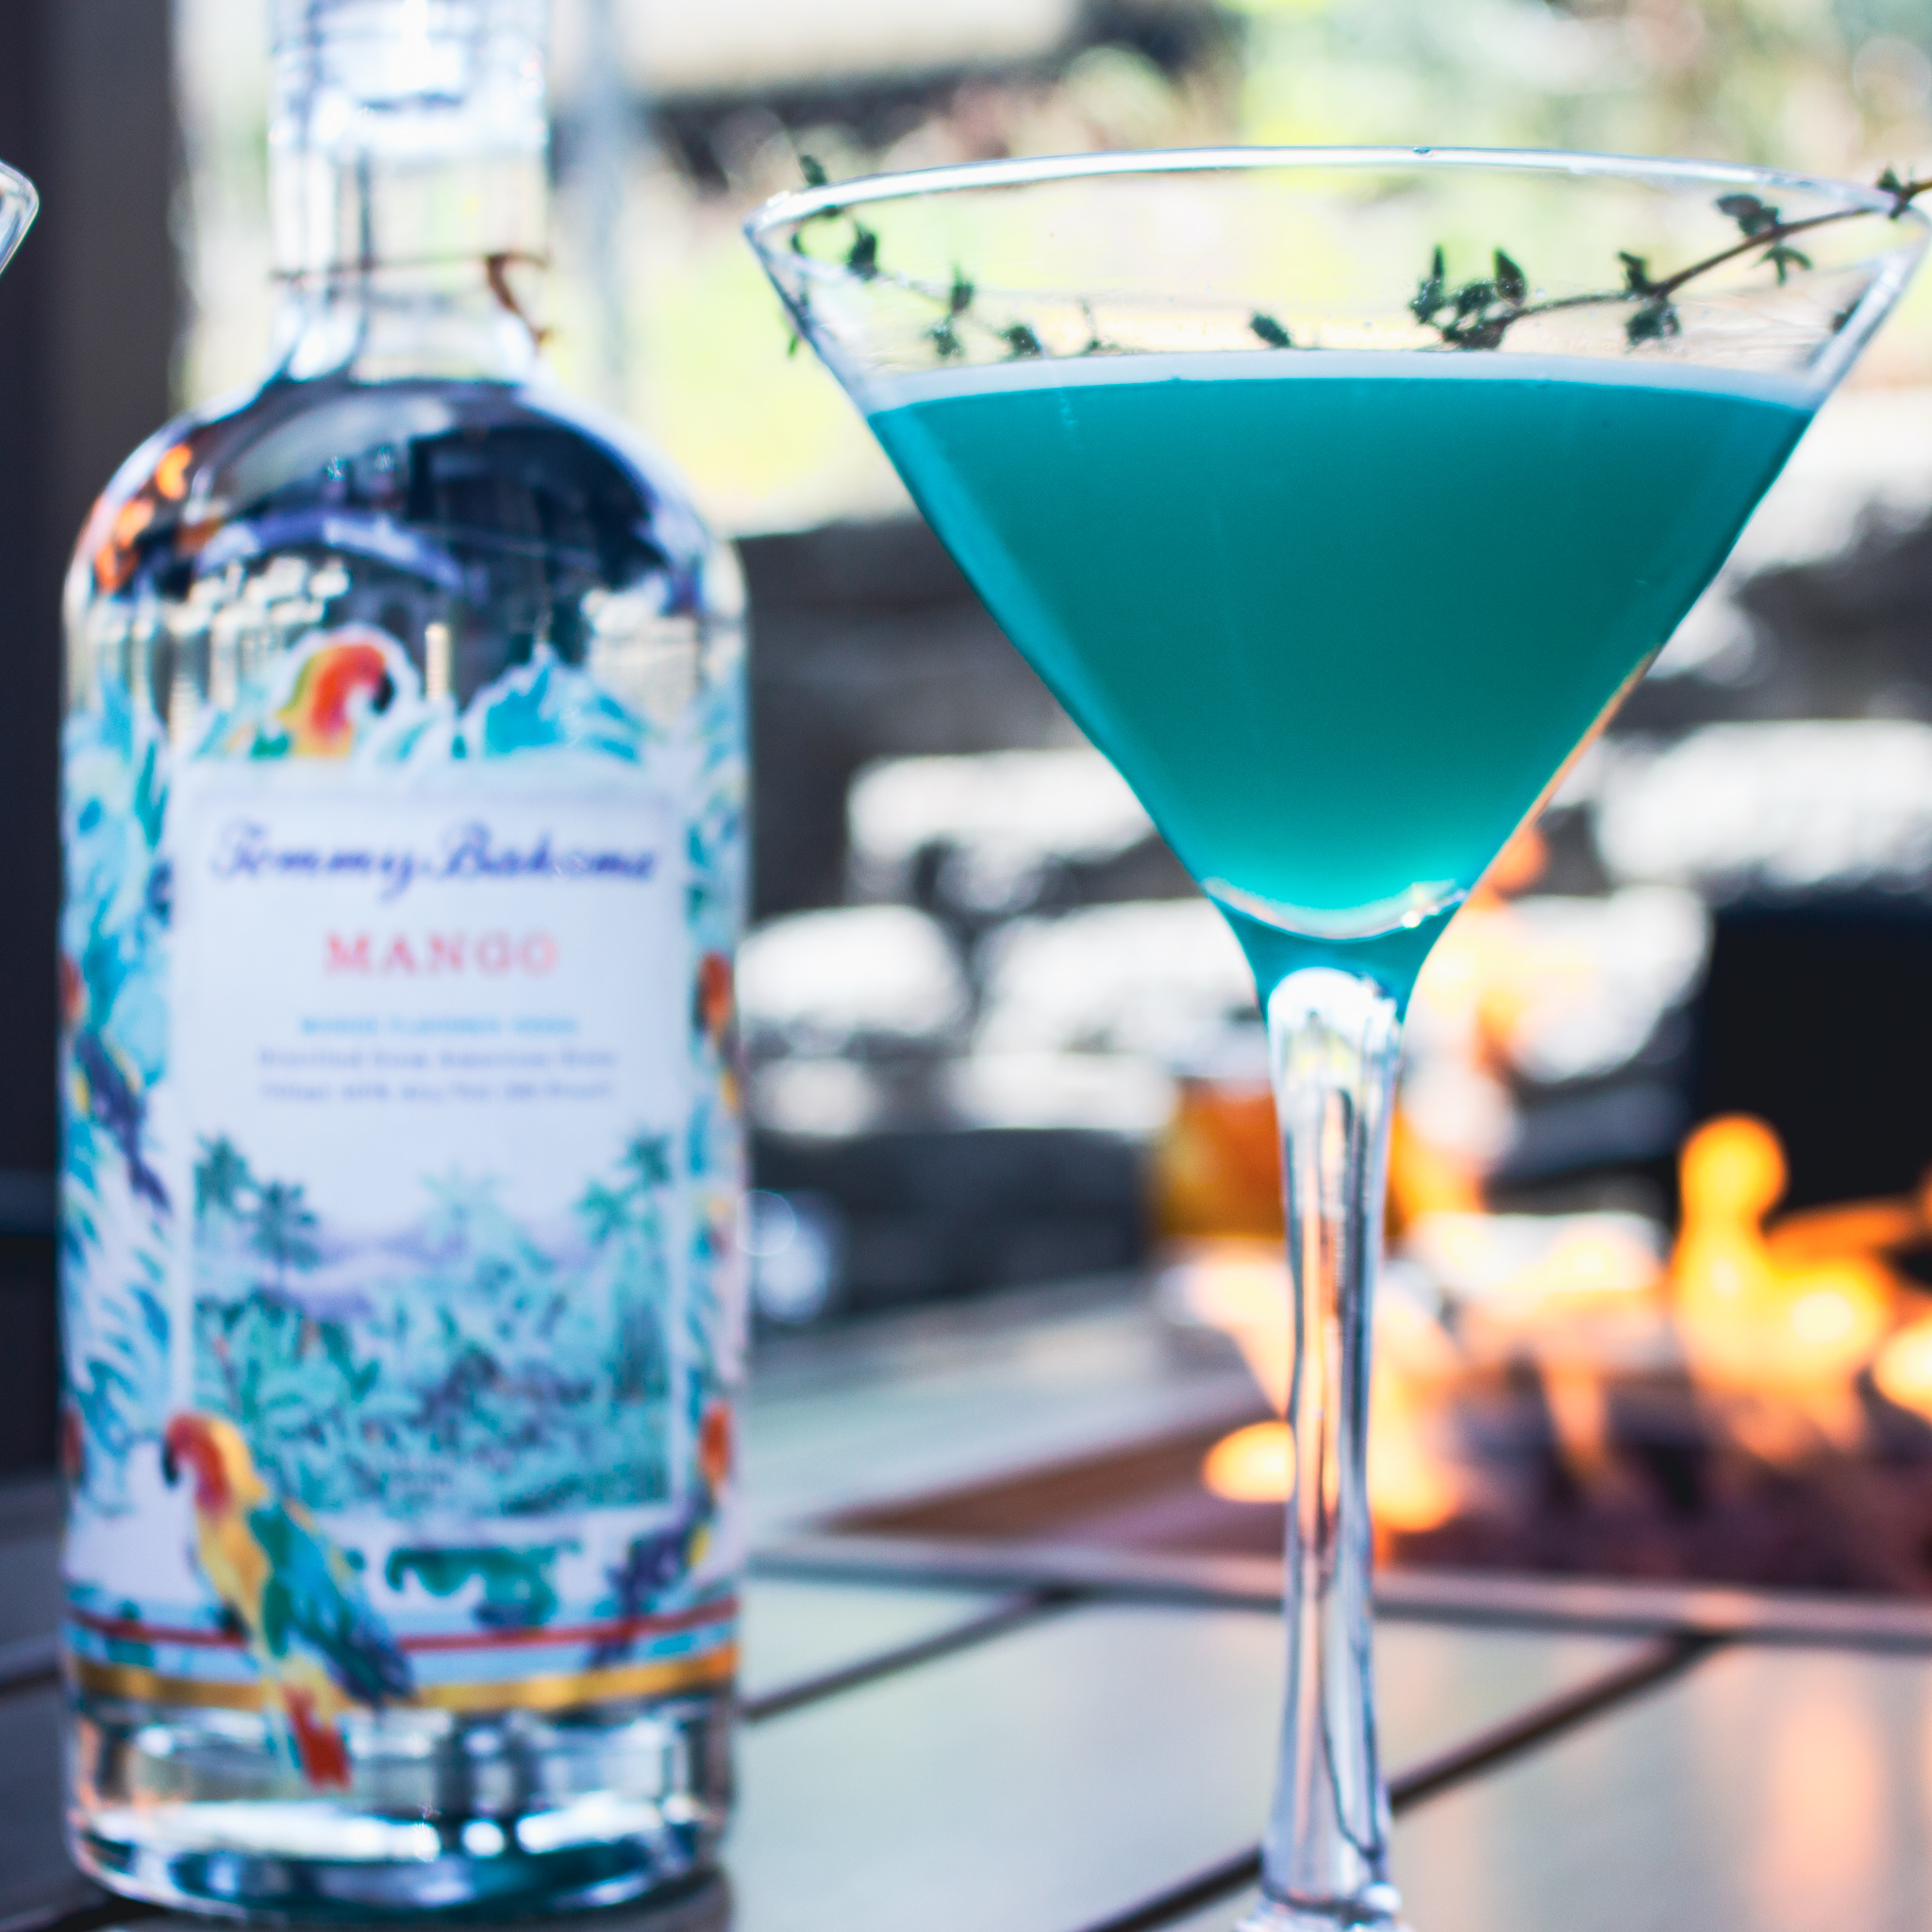 1 oz of Tommy Bahama Spirits Mango Vodka 
1 ½ oz Quantro 
1/2 oz of Blue Curacao 
1 ½ oz Pineapple Juice 
Fresh Lime 
Agave 

Shake it up with 3-4 ice cubes, pour into a martini glass and serve with garnish with a spring of (Island) Thyme.